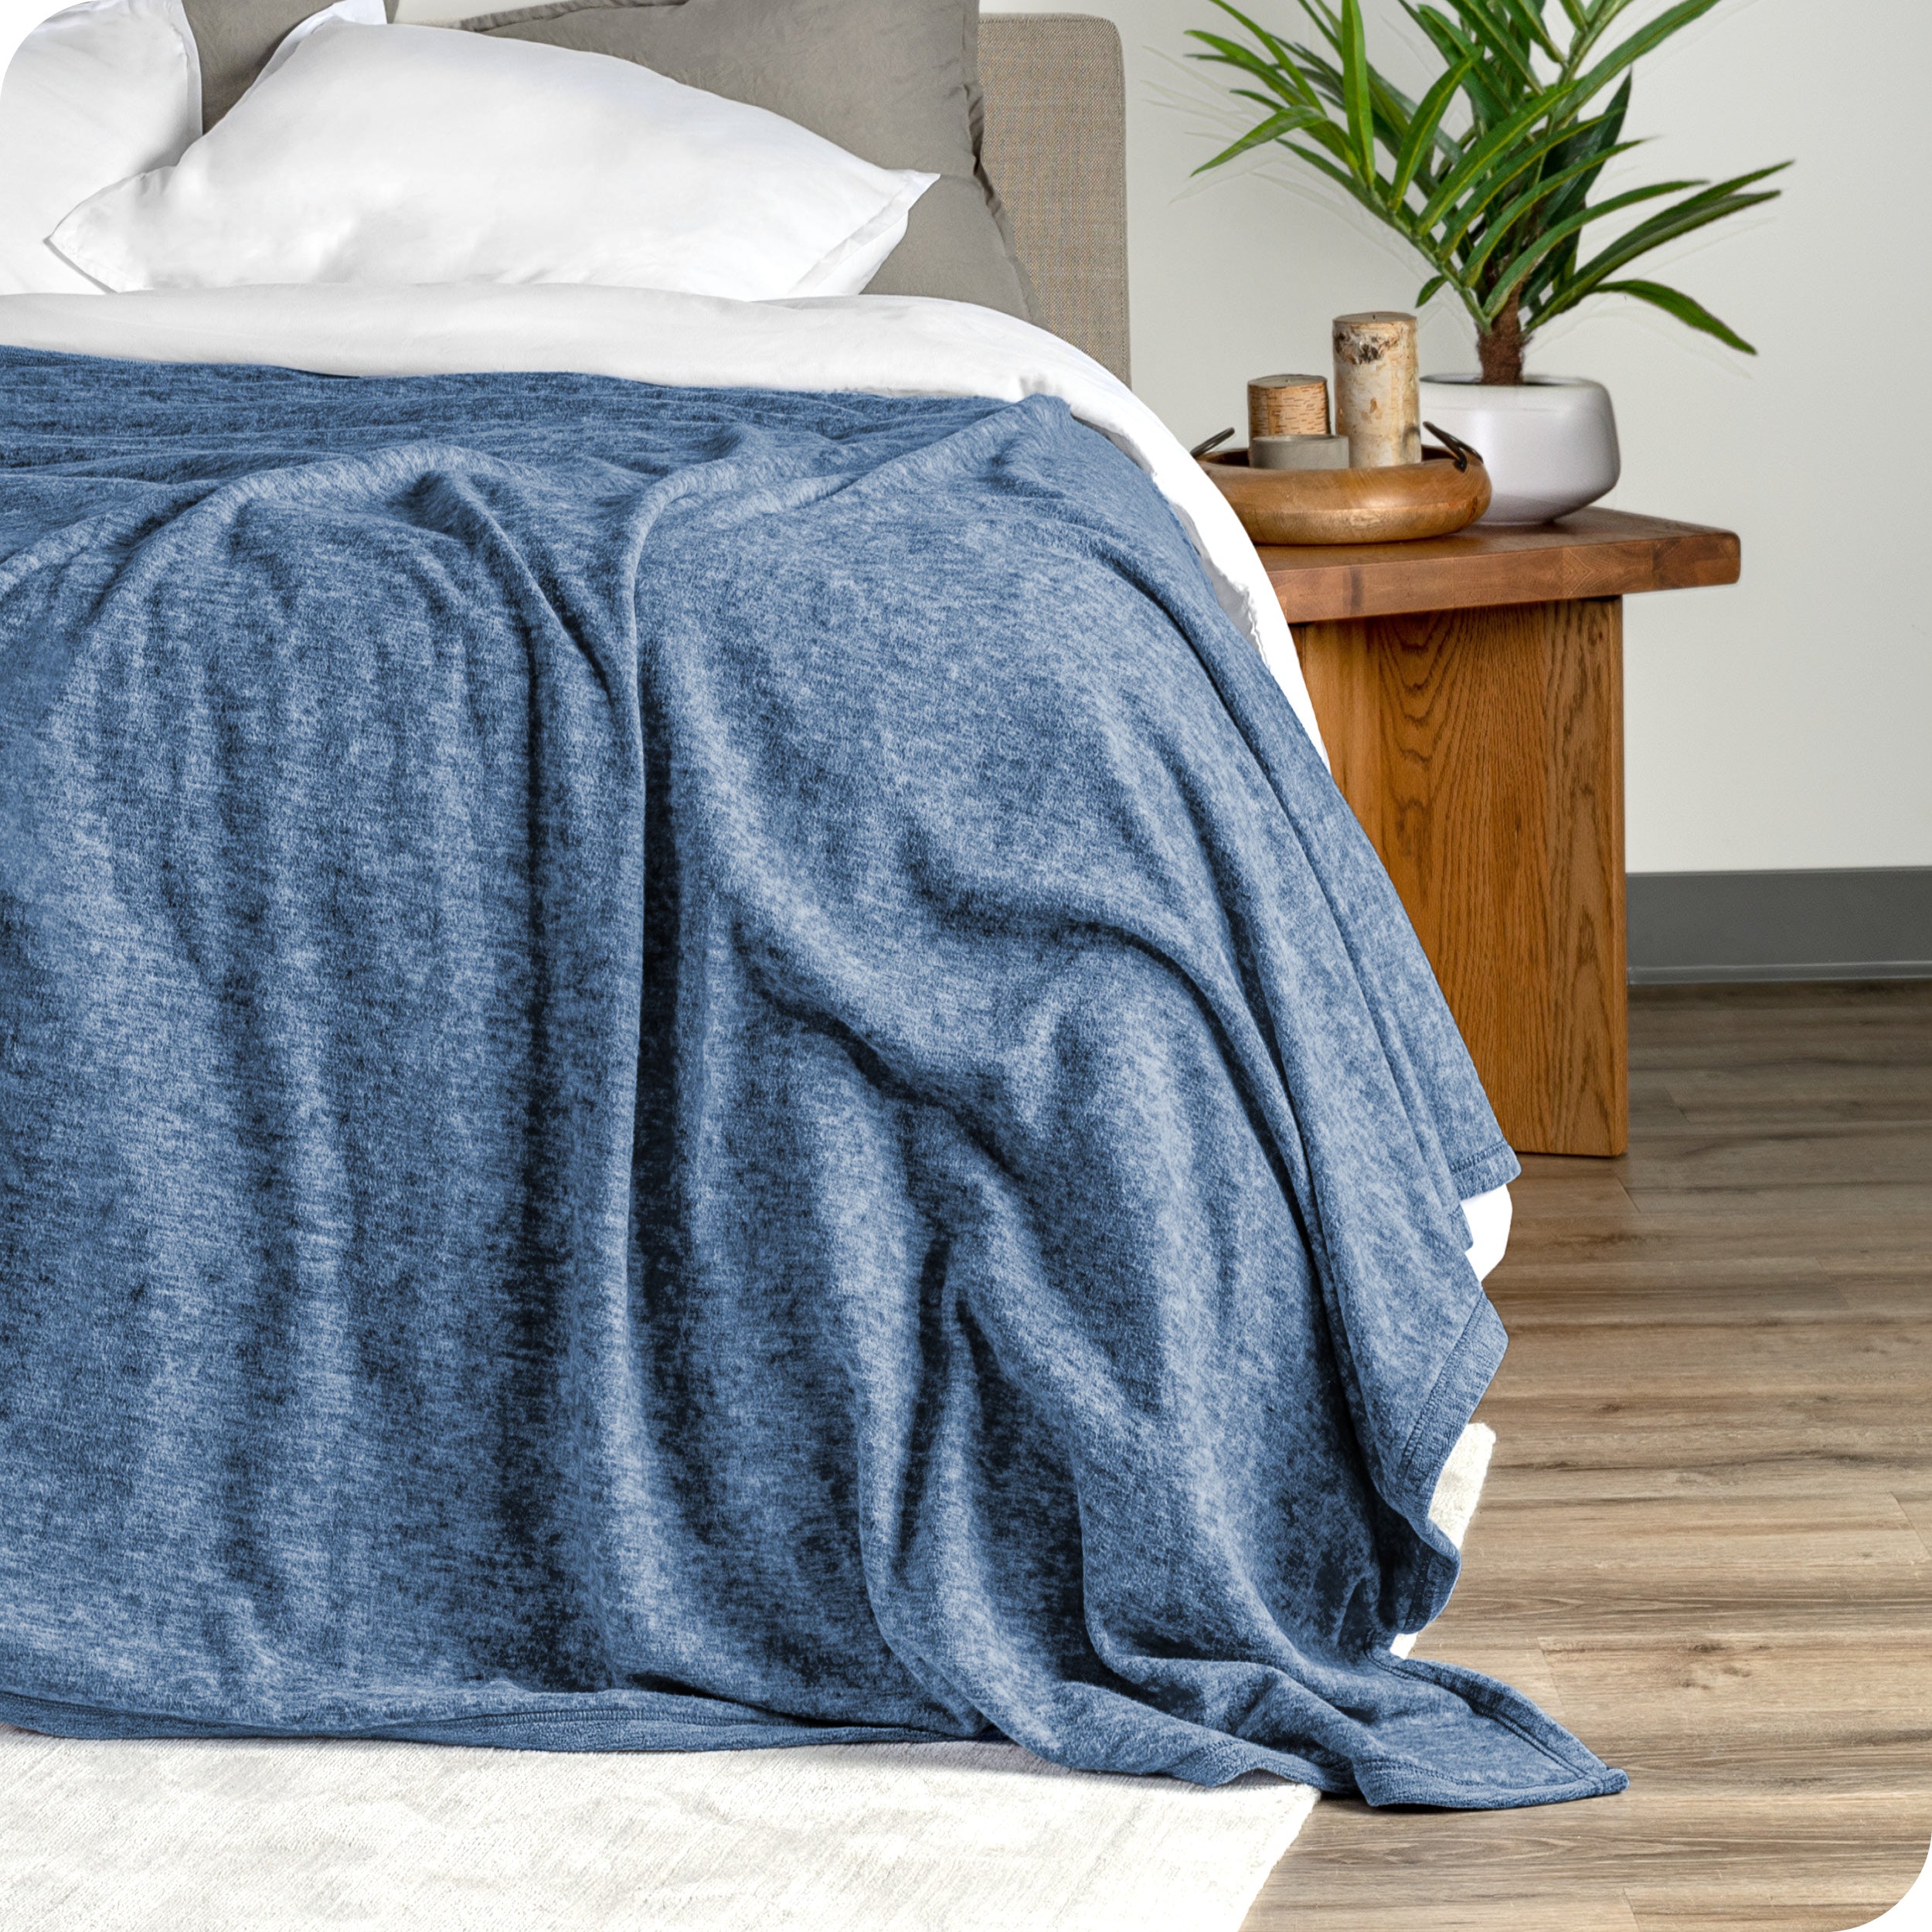 A polar fleece blanket drapped over the side and the end of a bed made with all white bedding